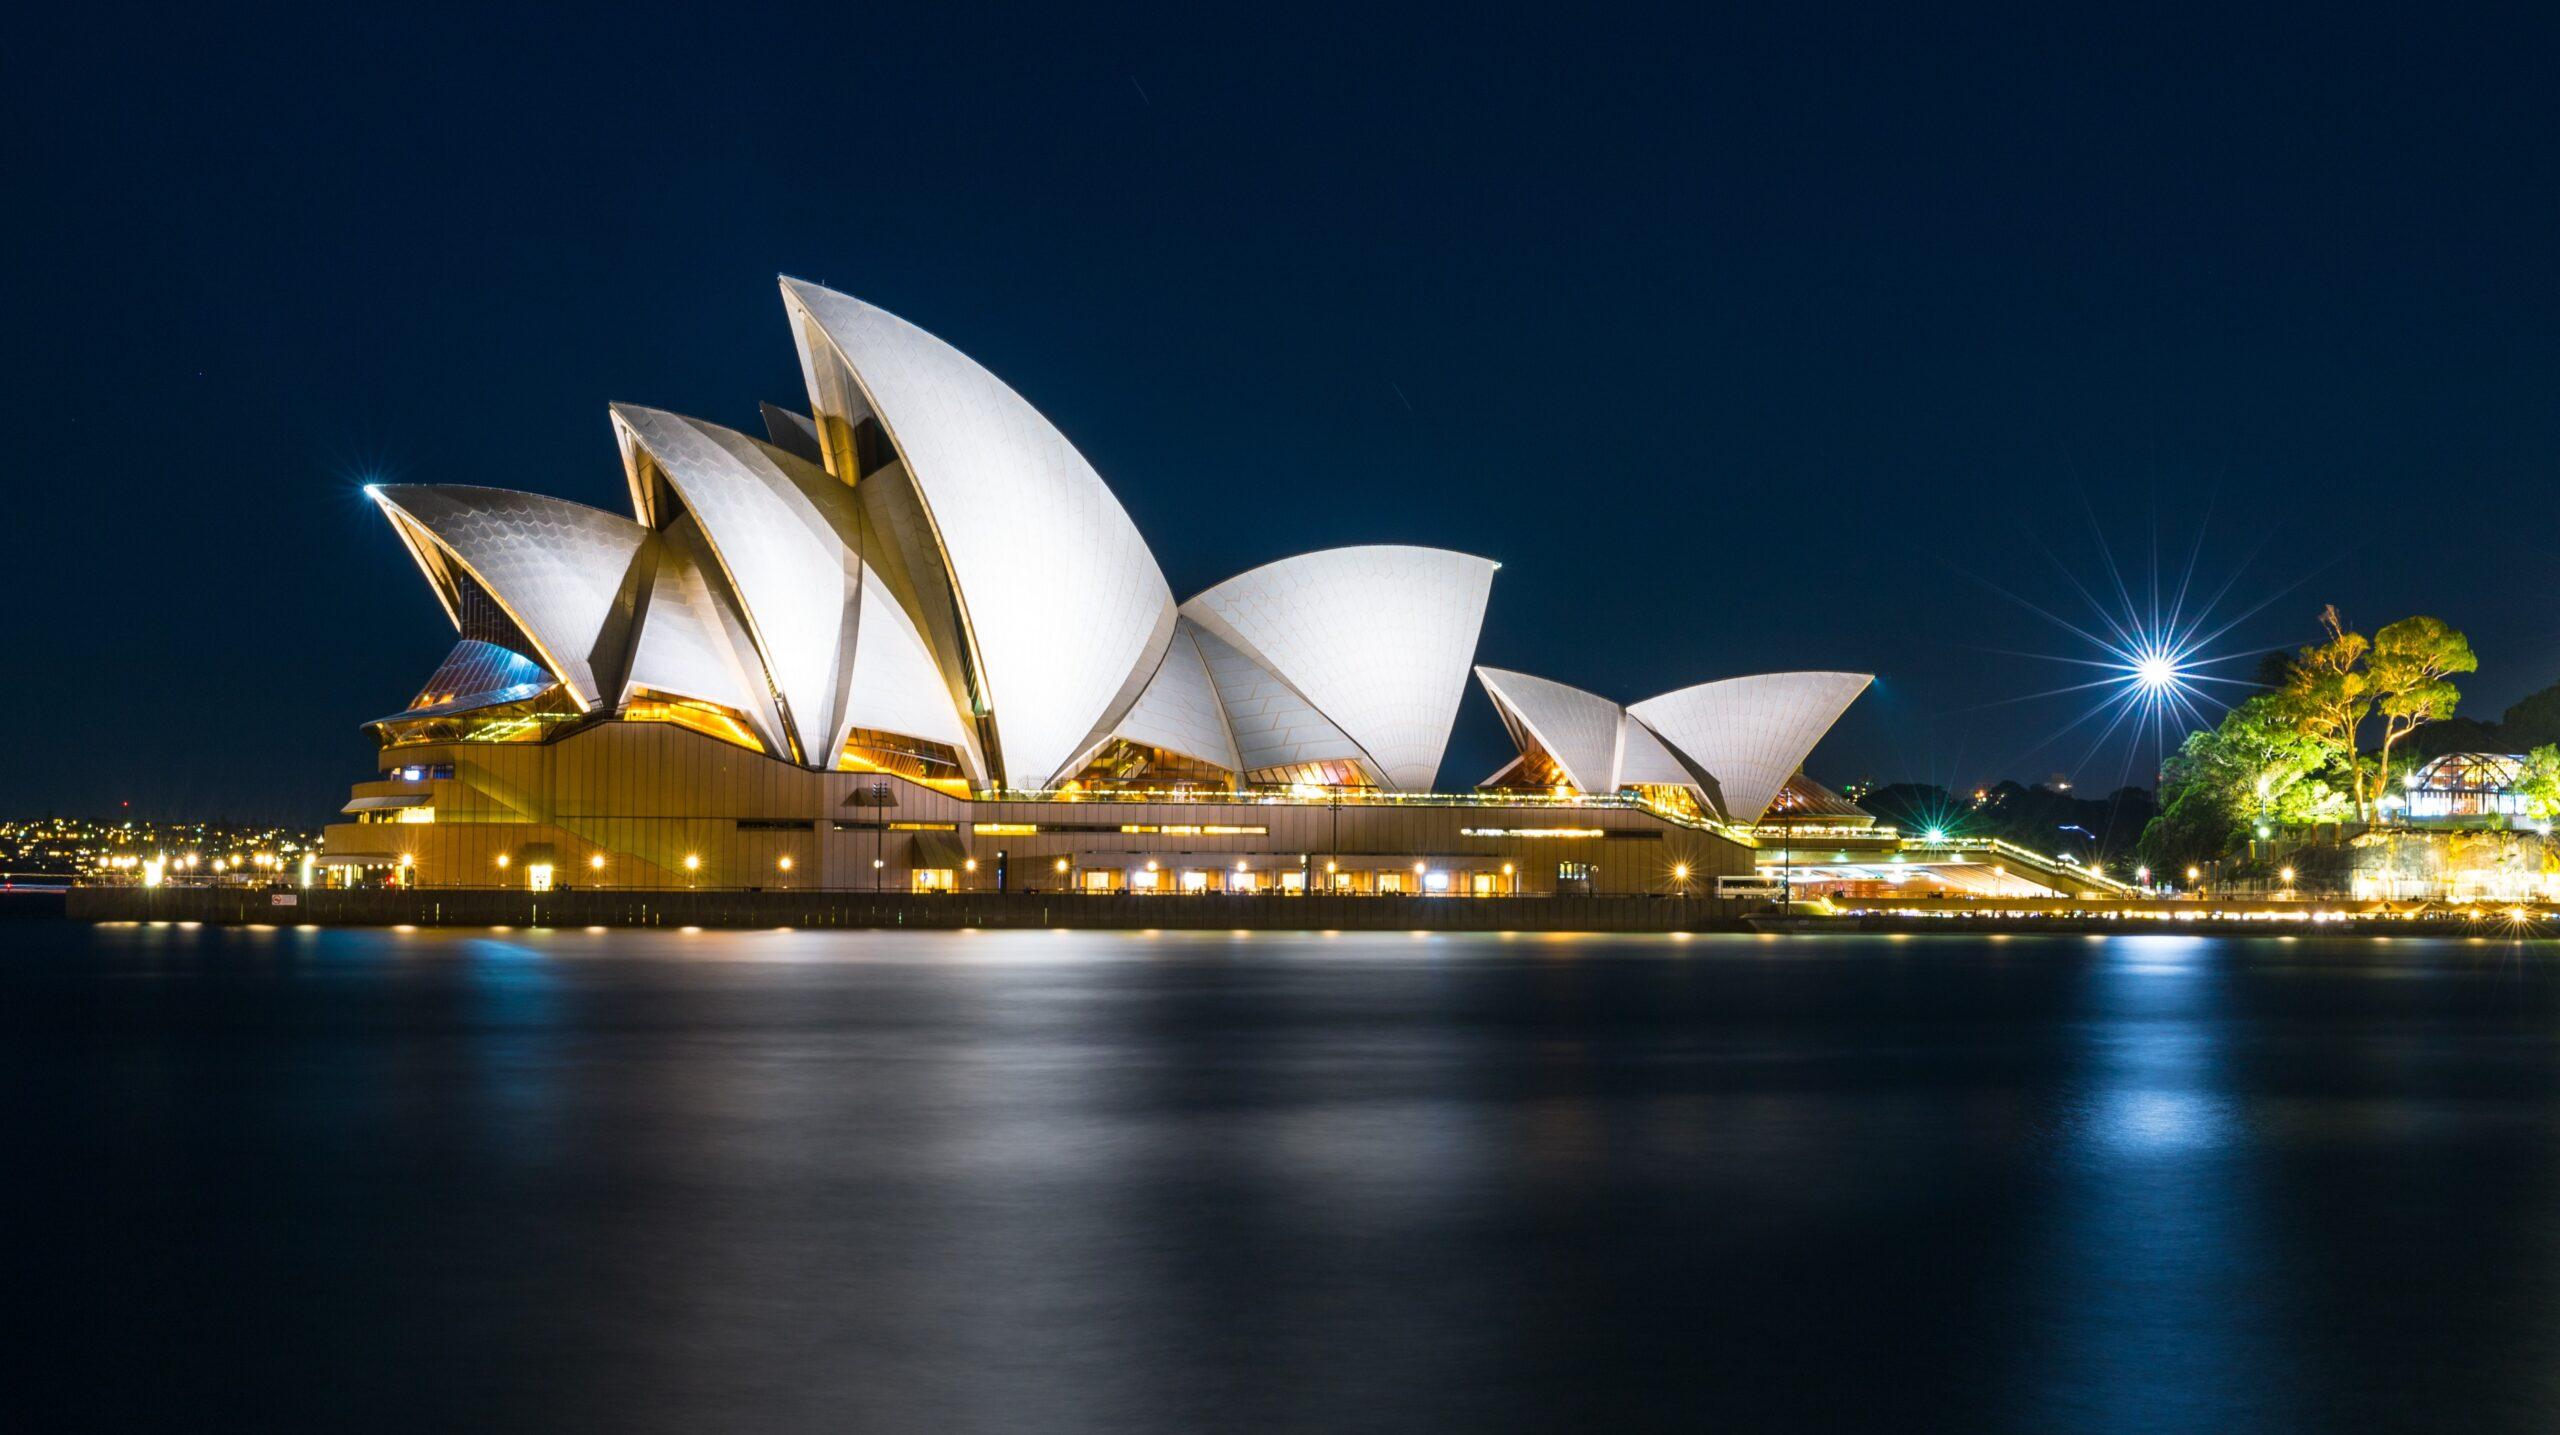 The Sydney Opera House lit up in the evening.